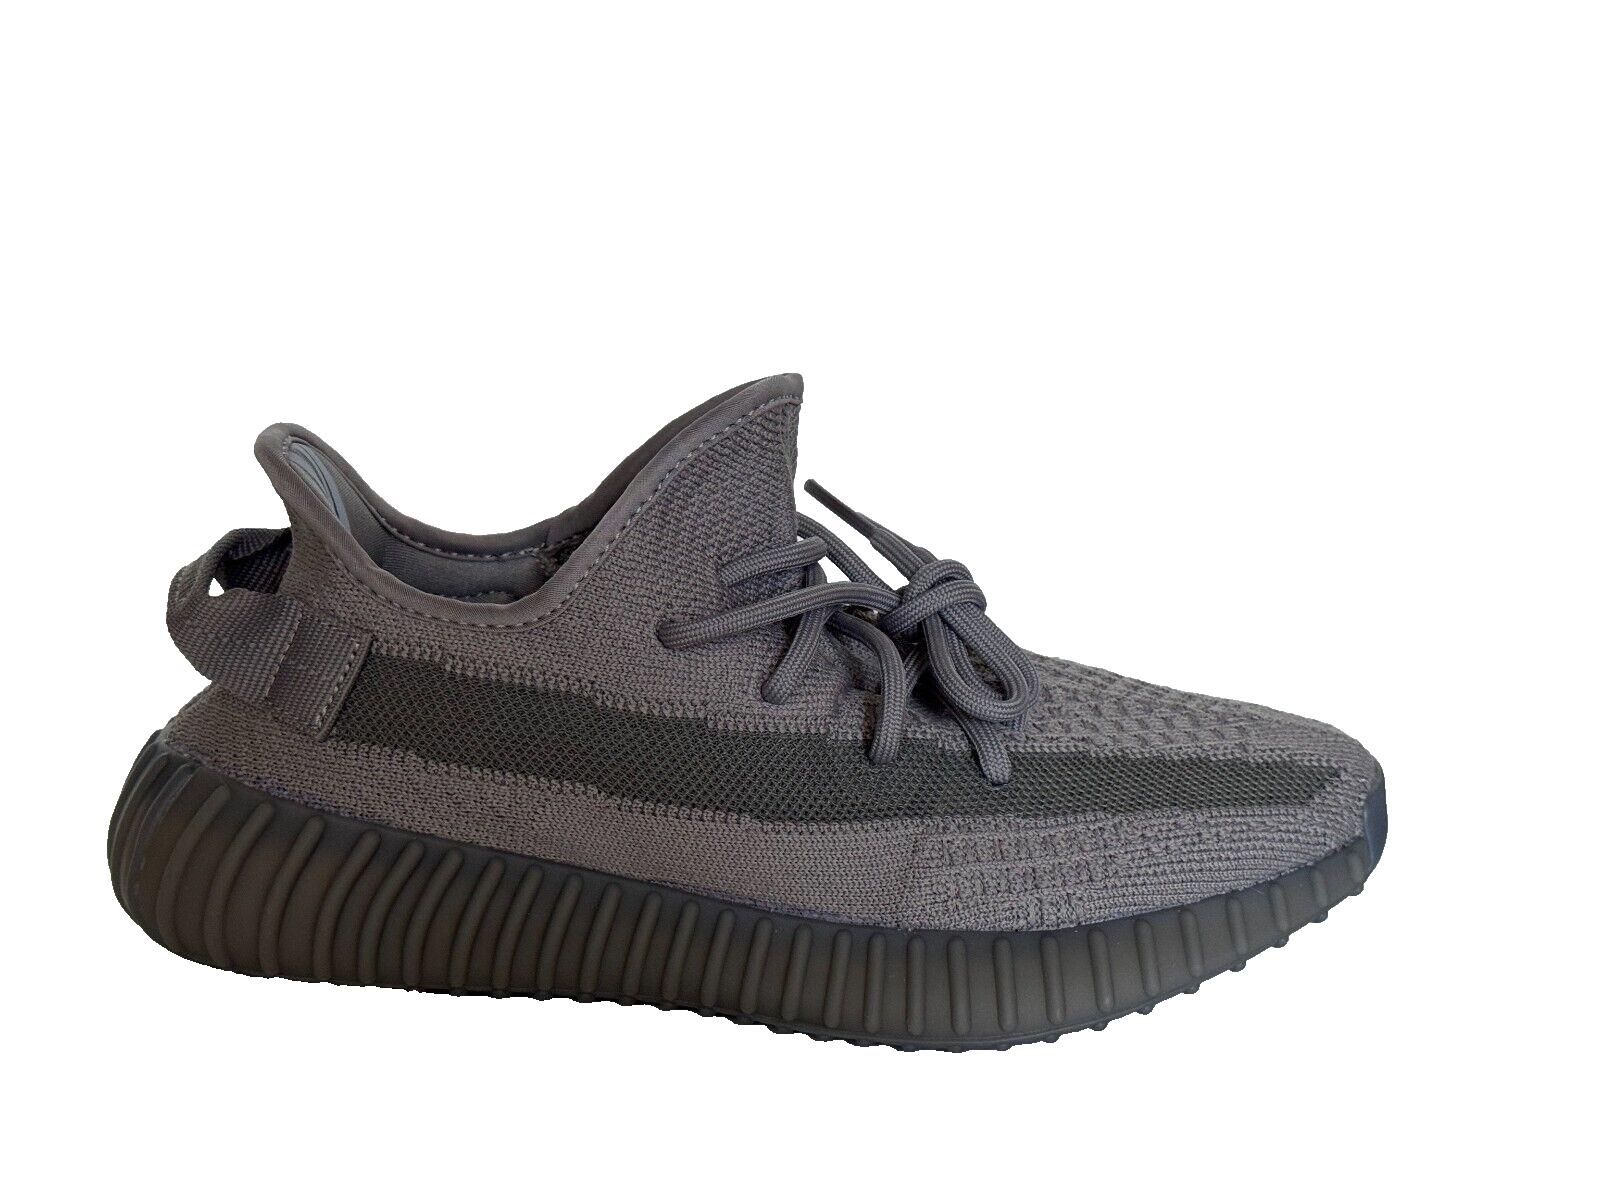 NIB Yeezy Boost 350 V2 Men’s Low Top Sneakers Gray 7 US  (40 Eu) Made by Adidas